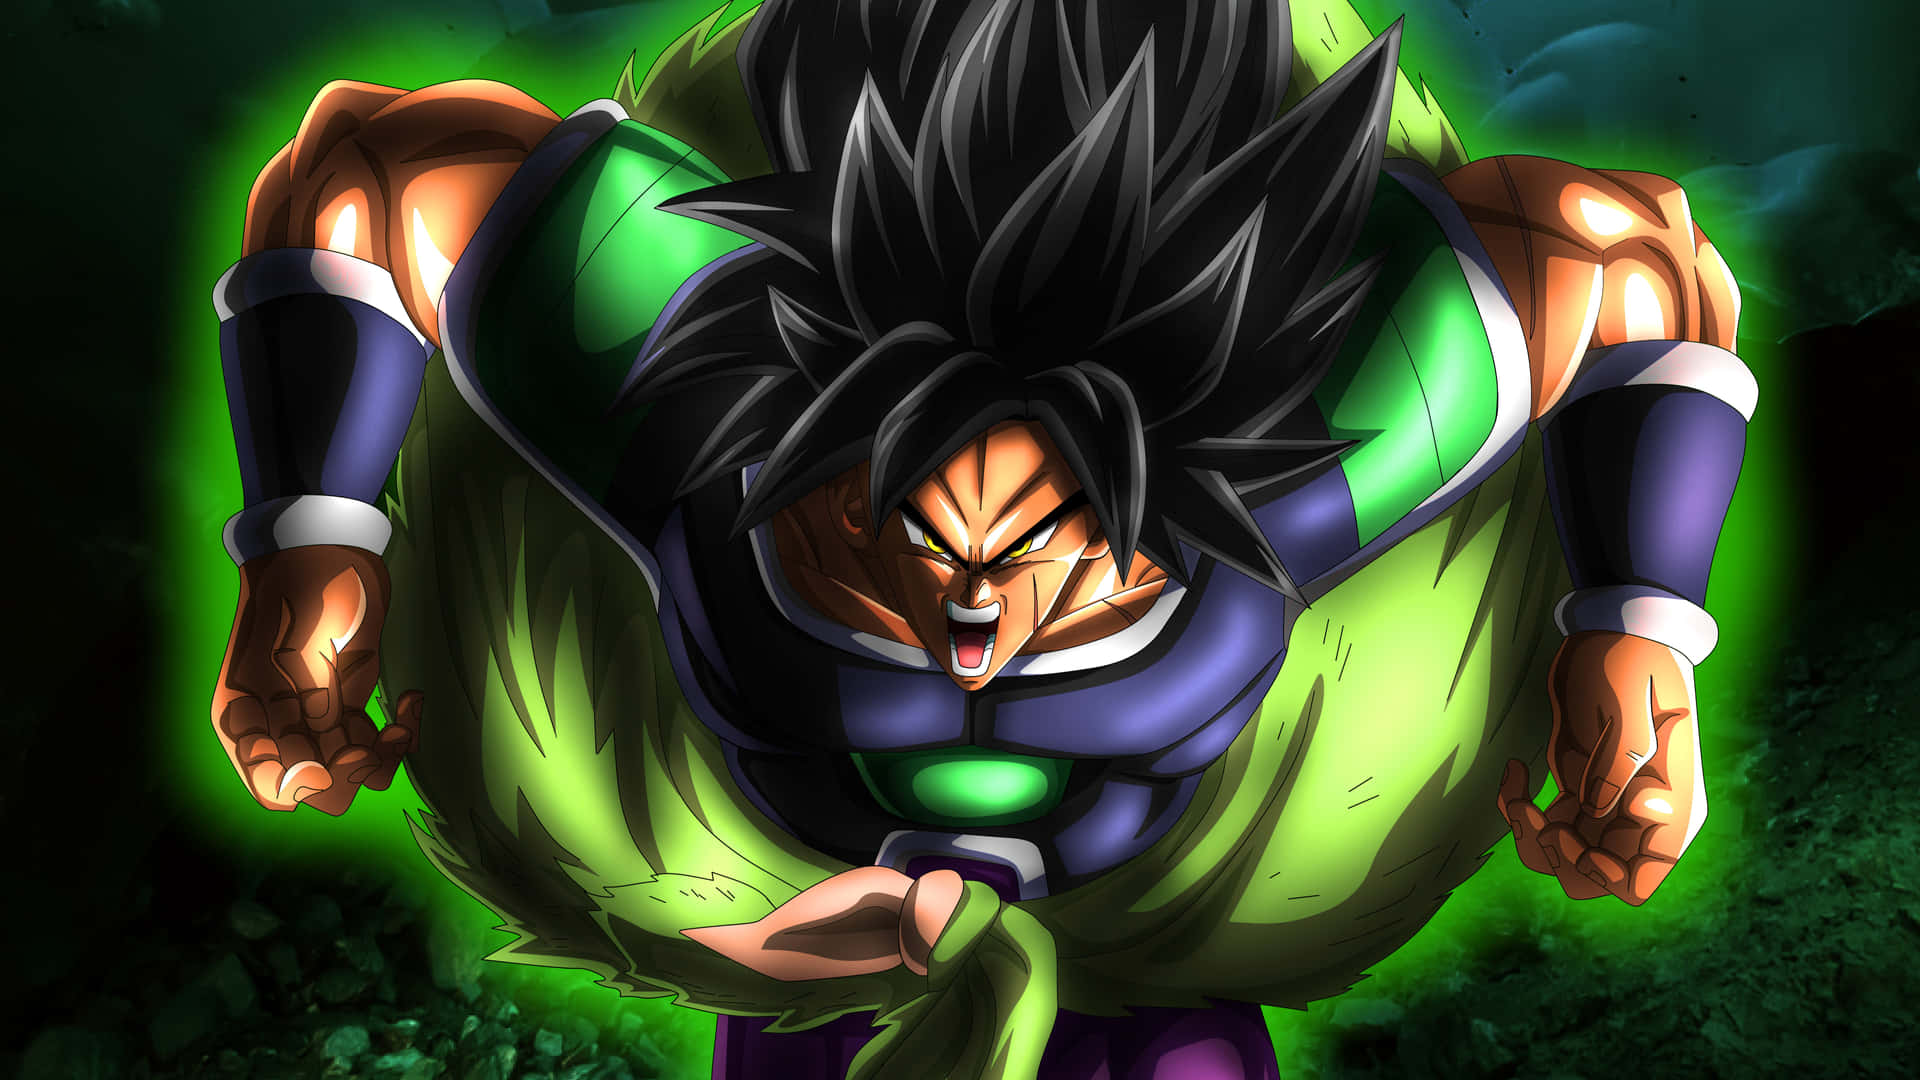 "Relive the Action of Dragon Ball Super Broly!"